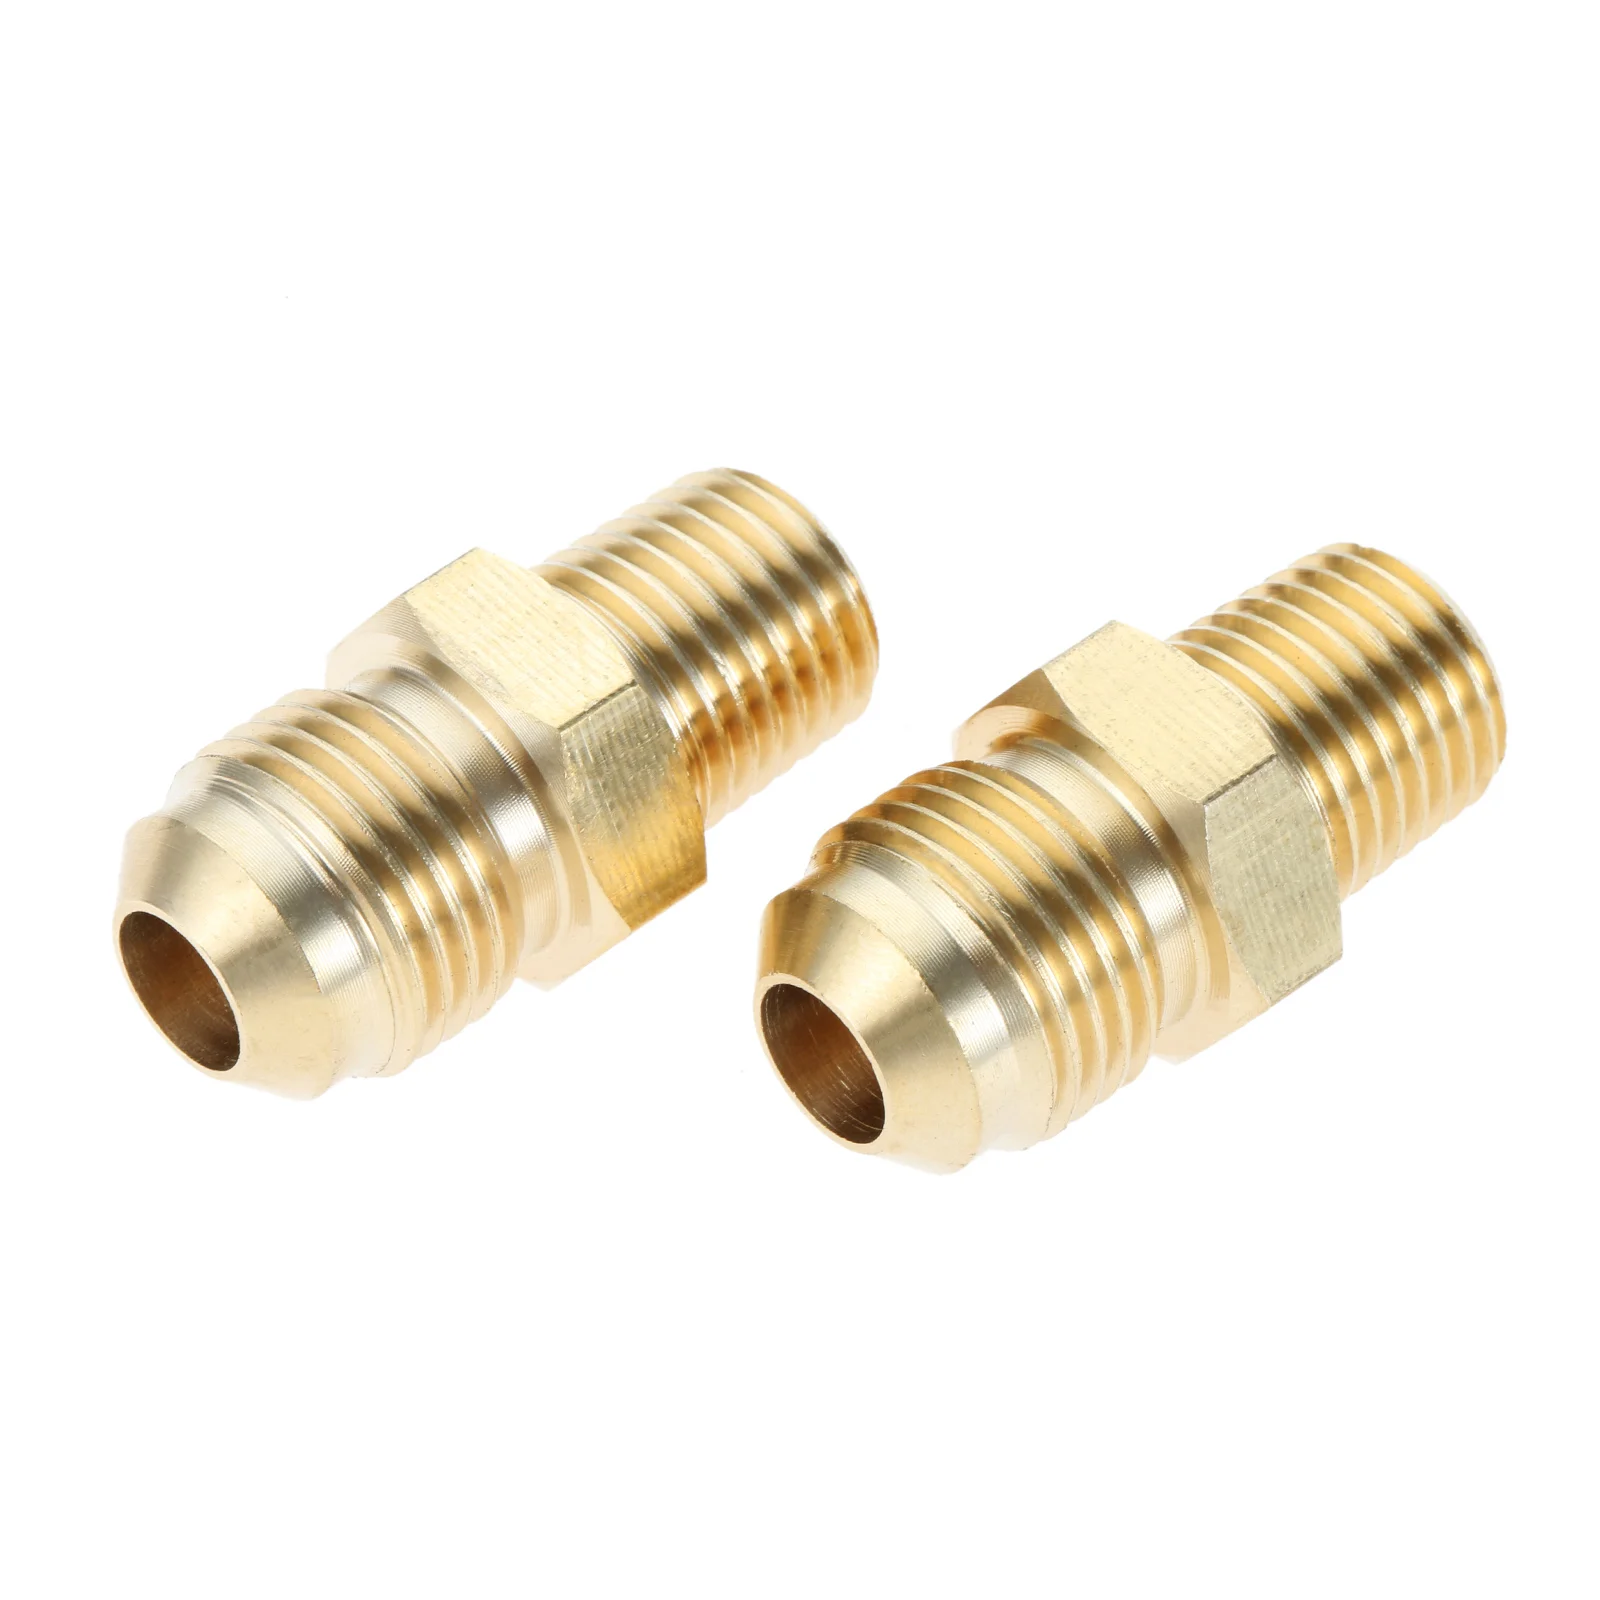 

2pcs 3/8" Male Flare x 1/4" Male NPT Thread Coupling Fittings Solid Brass Propane Adapter BBQ Coupler Pipe Flare Gas Connector